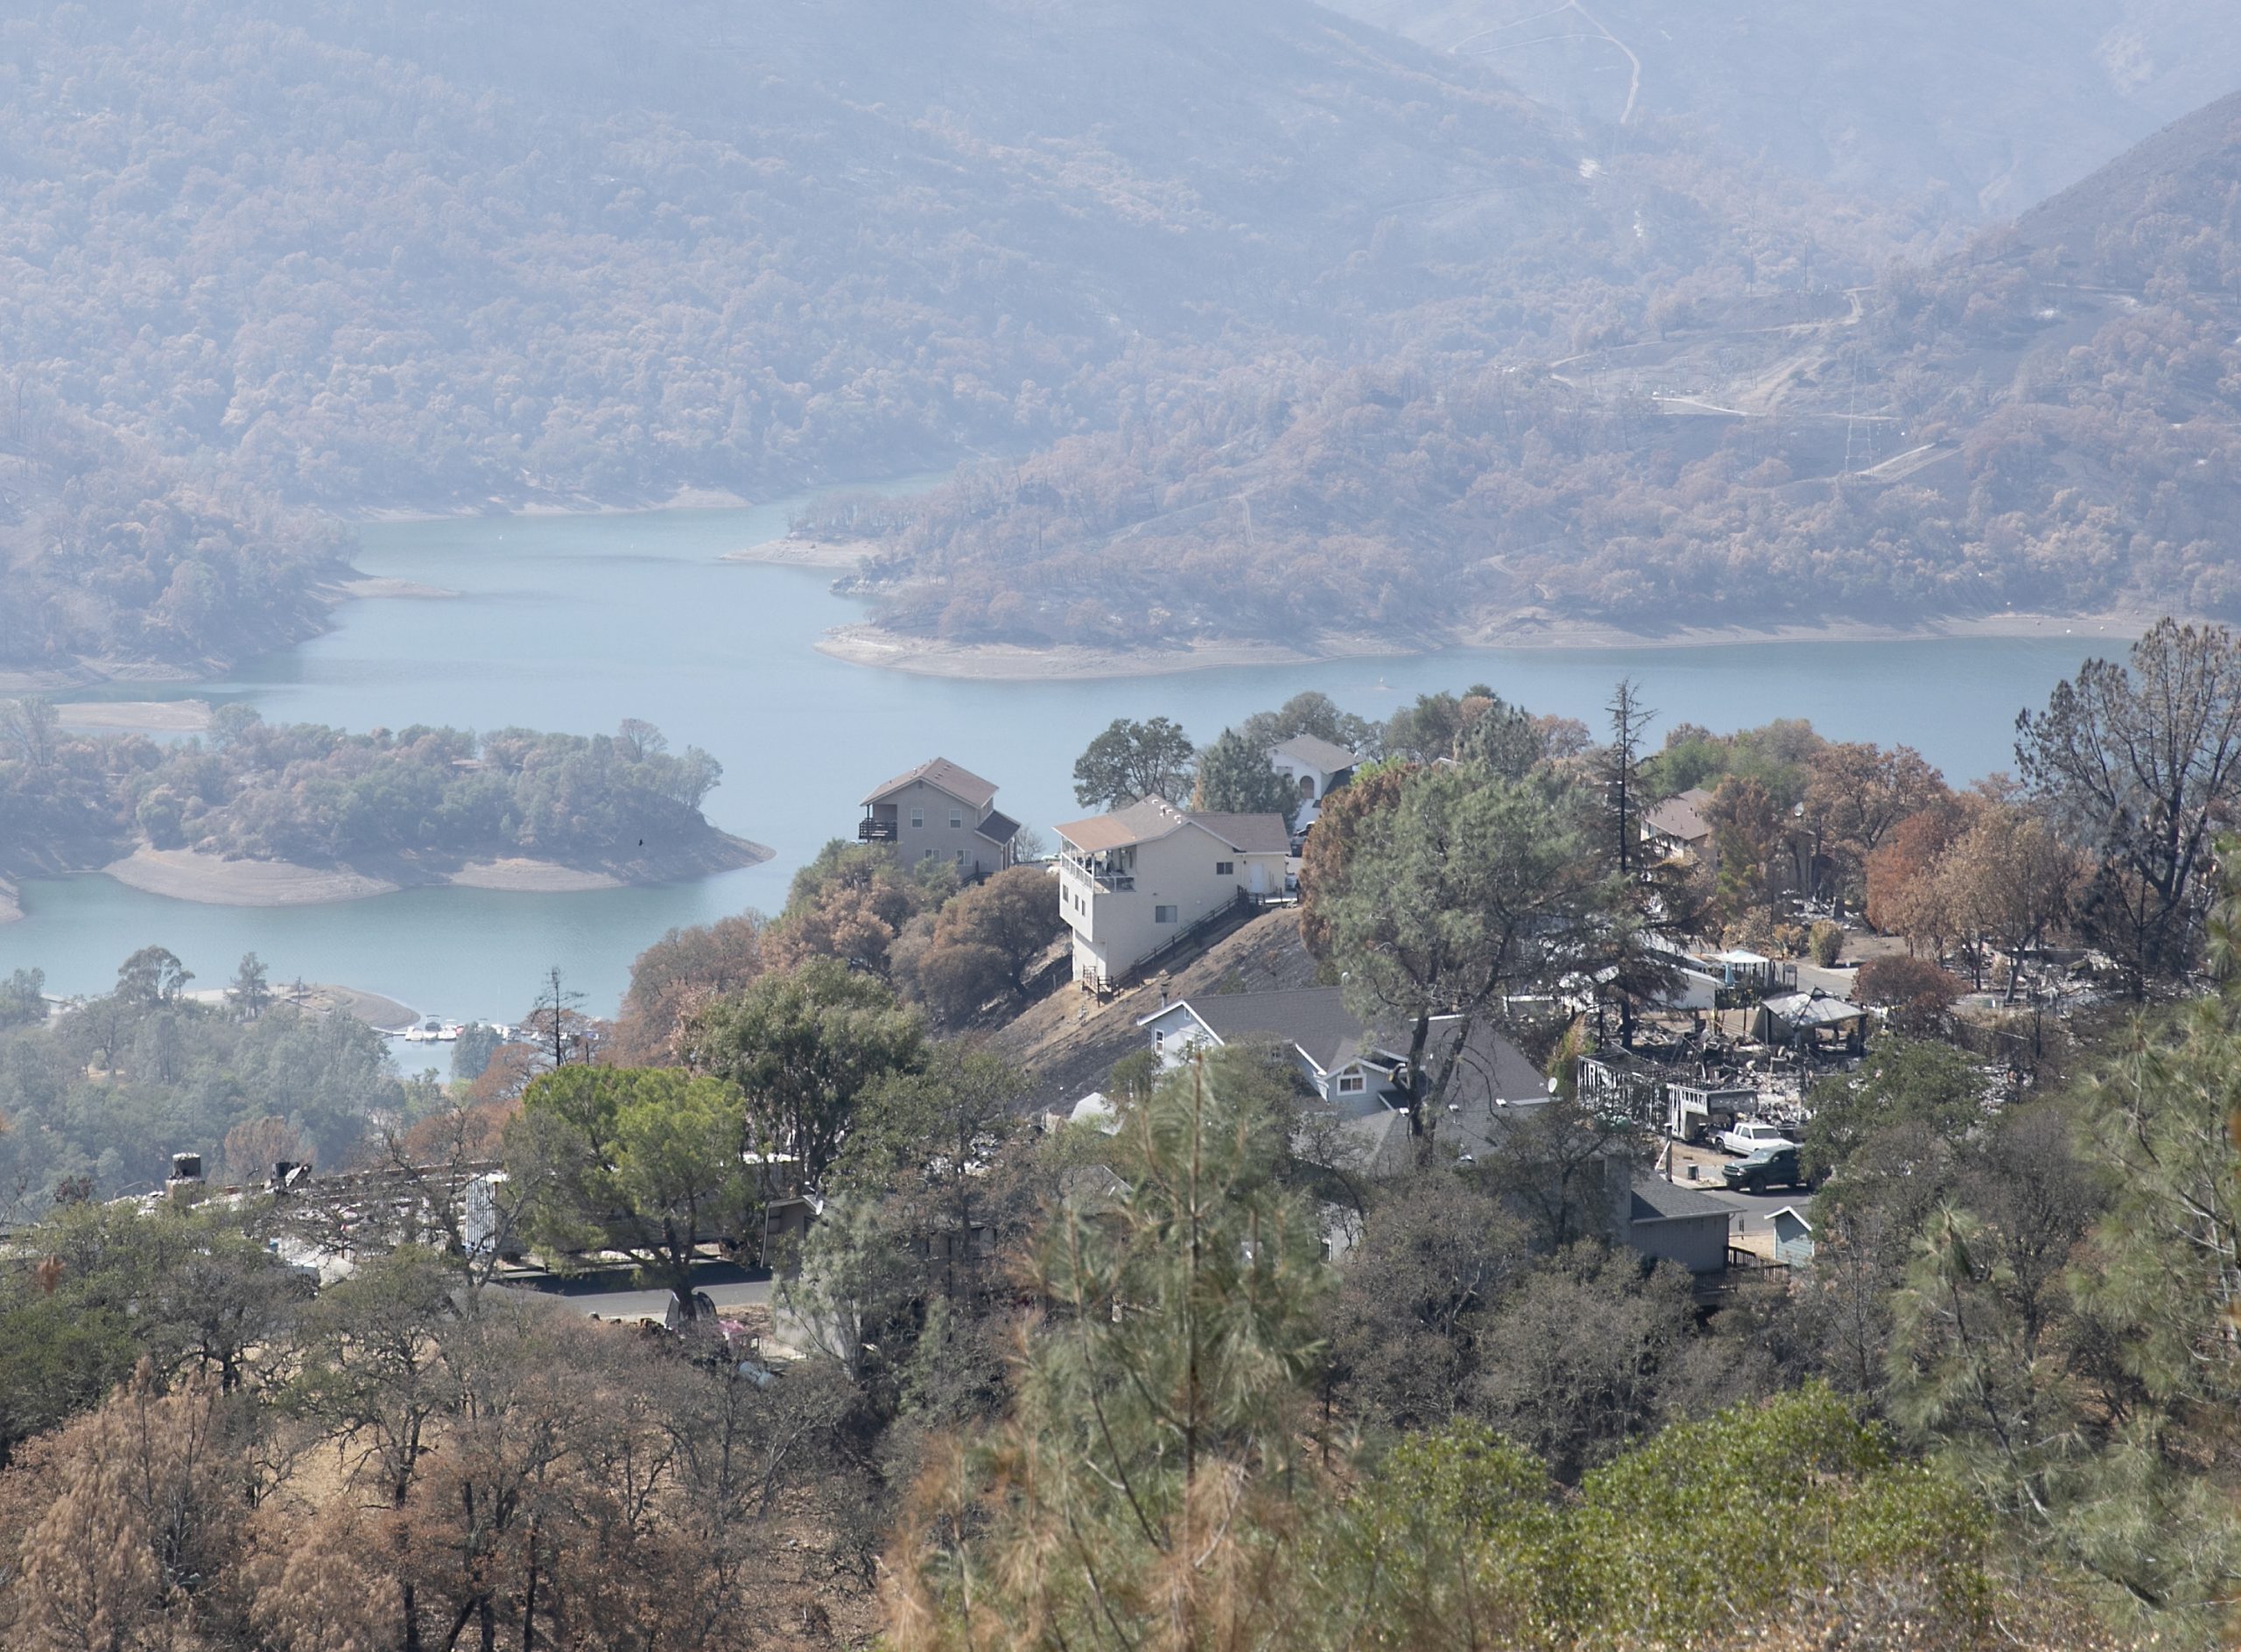 Homes destroyed by the LNU Lighting Complex Fire seen interspersed with untouched homes above Lake Berryessa, a resort area and water supply reservoir, on Sept. 21, 2020. Following the lighting complex fires in August, residents were advised not to drink or boil the tap water out of concerns for benzene and other contaminants. Photo by Anne Wernikoff for CalMatters